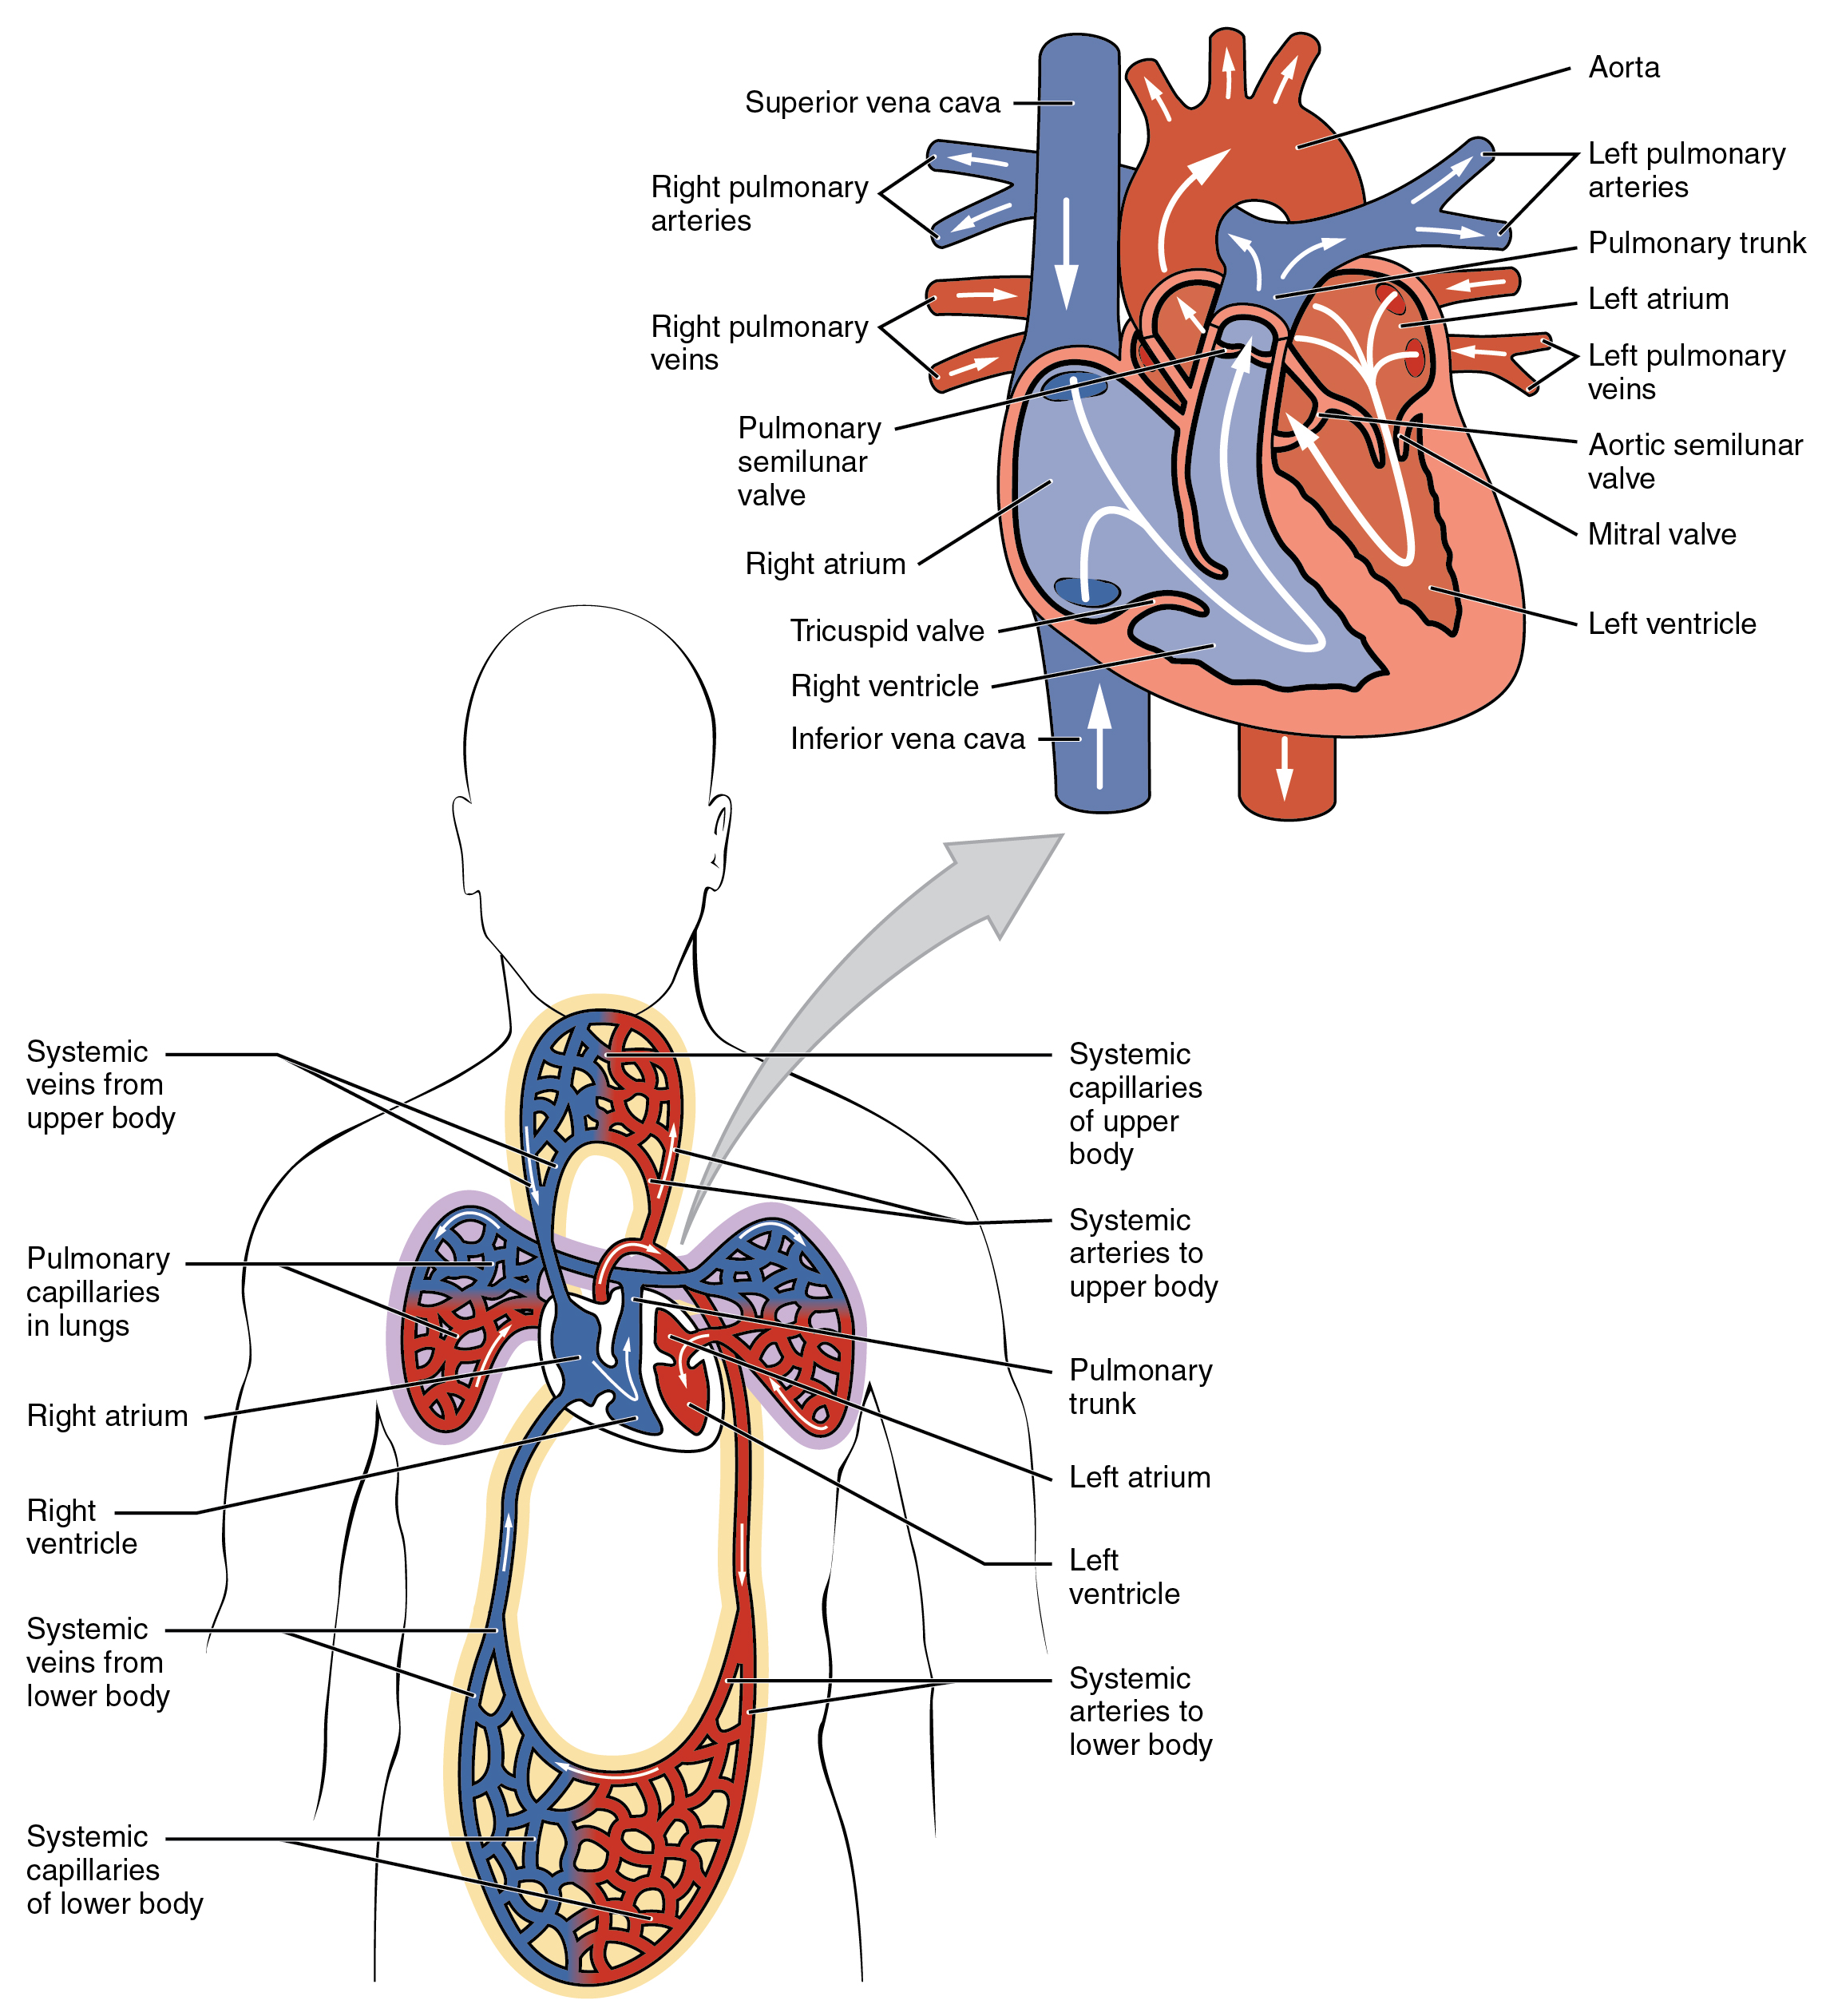 The top panel shows the human heart with the arteries and veins labeled. The bottom panel shows the human circulatory system.